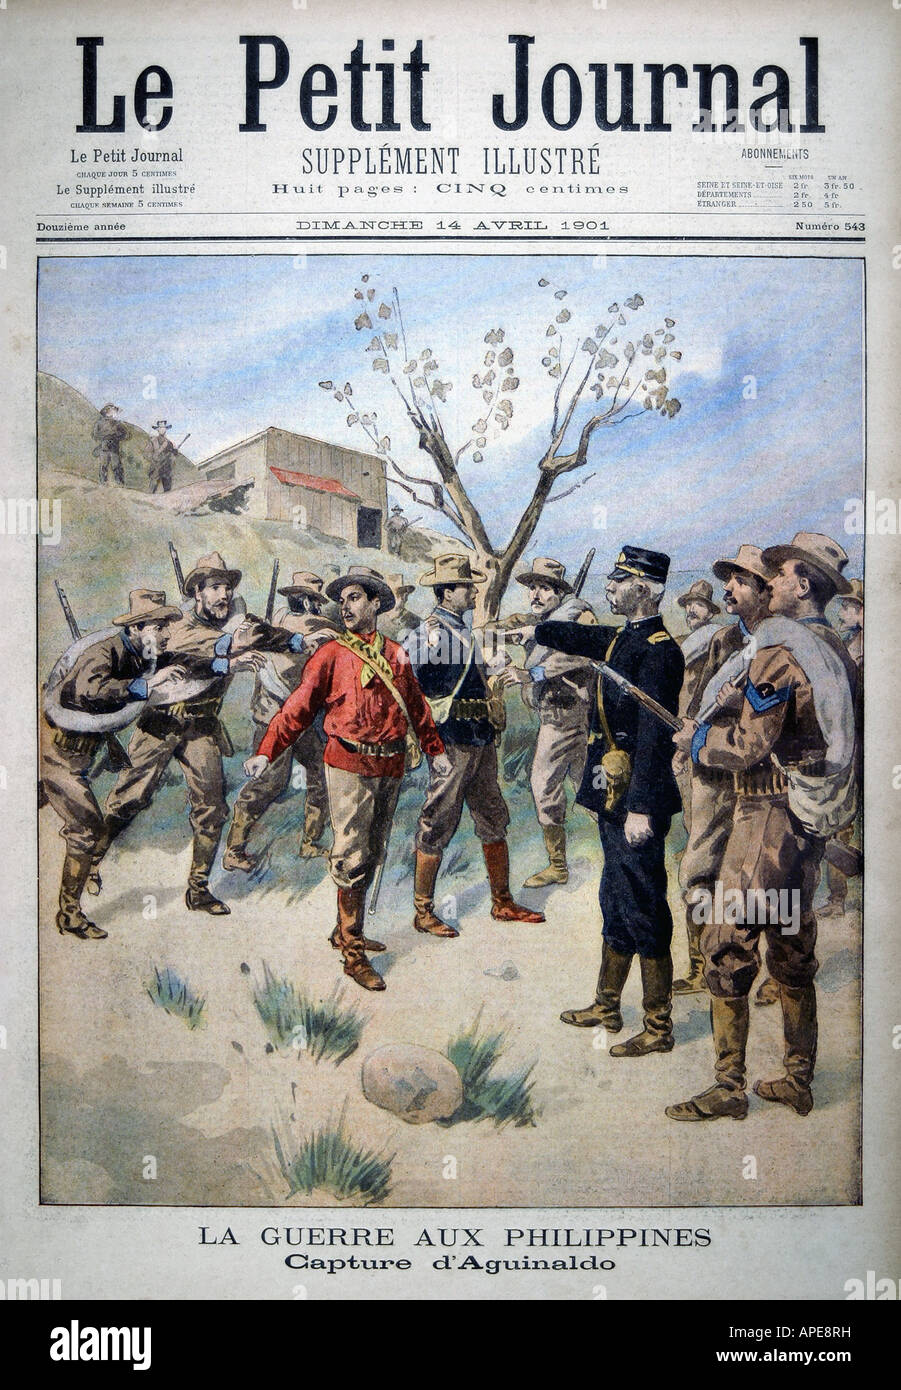 press/media, magazines, 'Le Petit Journal', Paris, 12. volume, number 543, illustrated supplement, Sunday 14 April 1901, title, 'The War on the Philippines', , Stock Photo